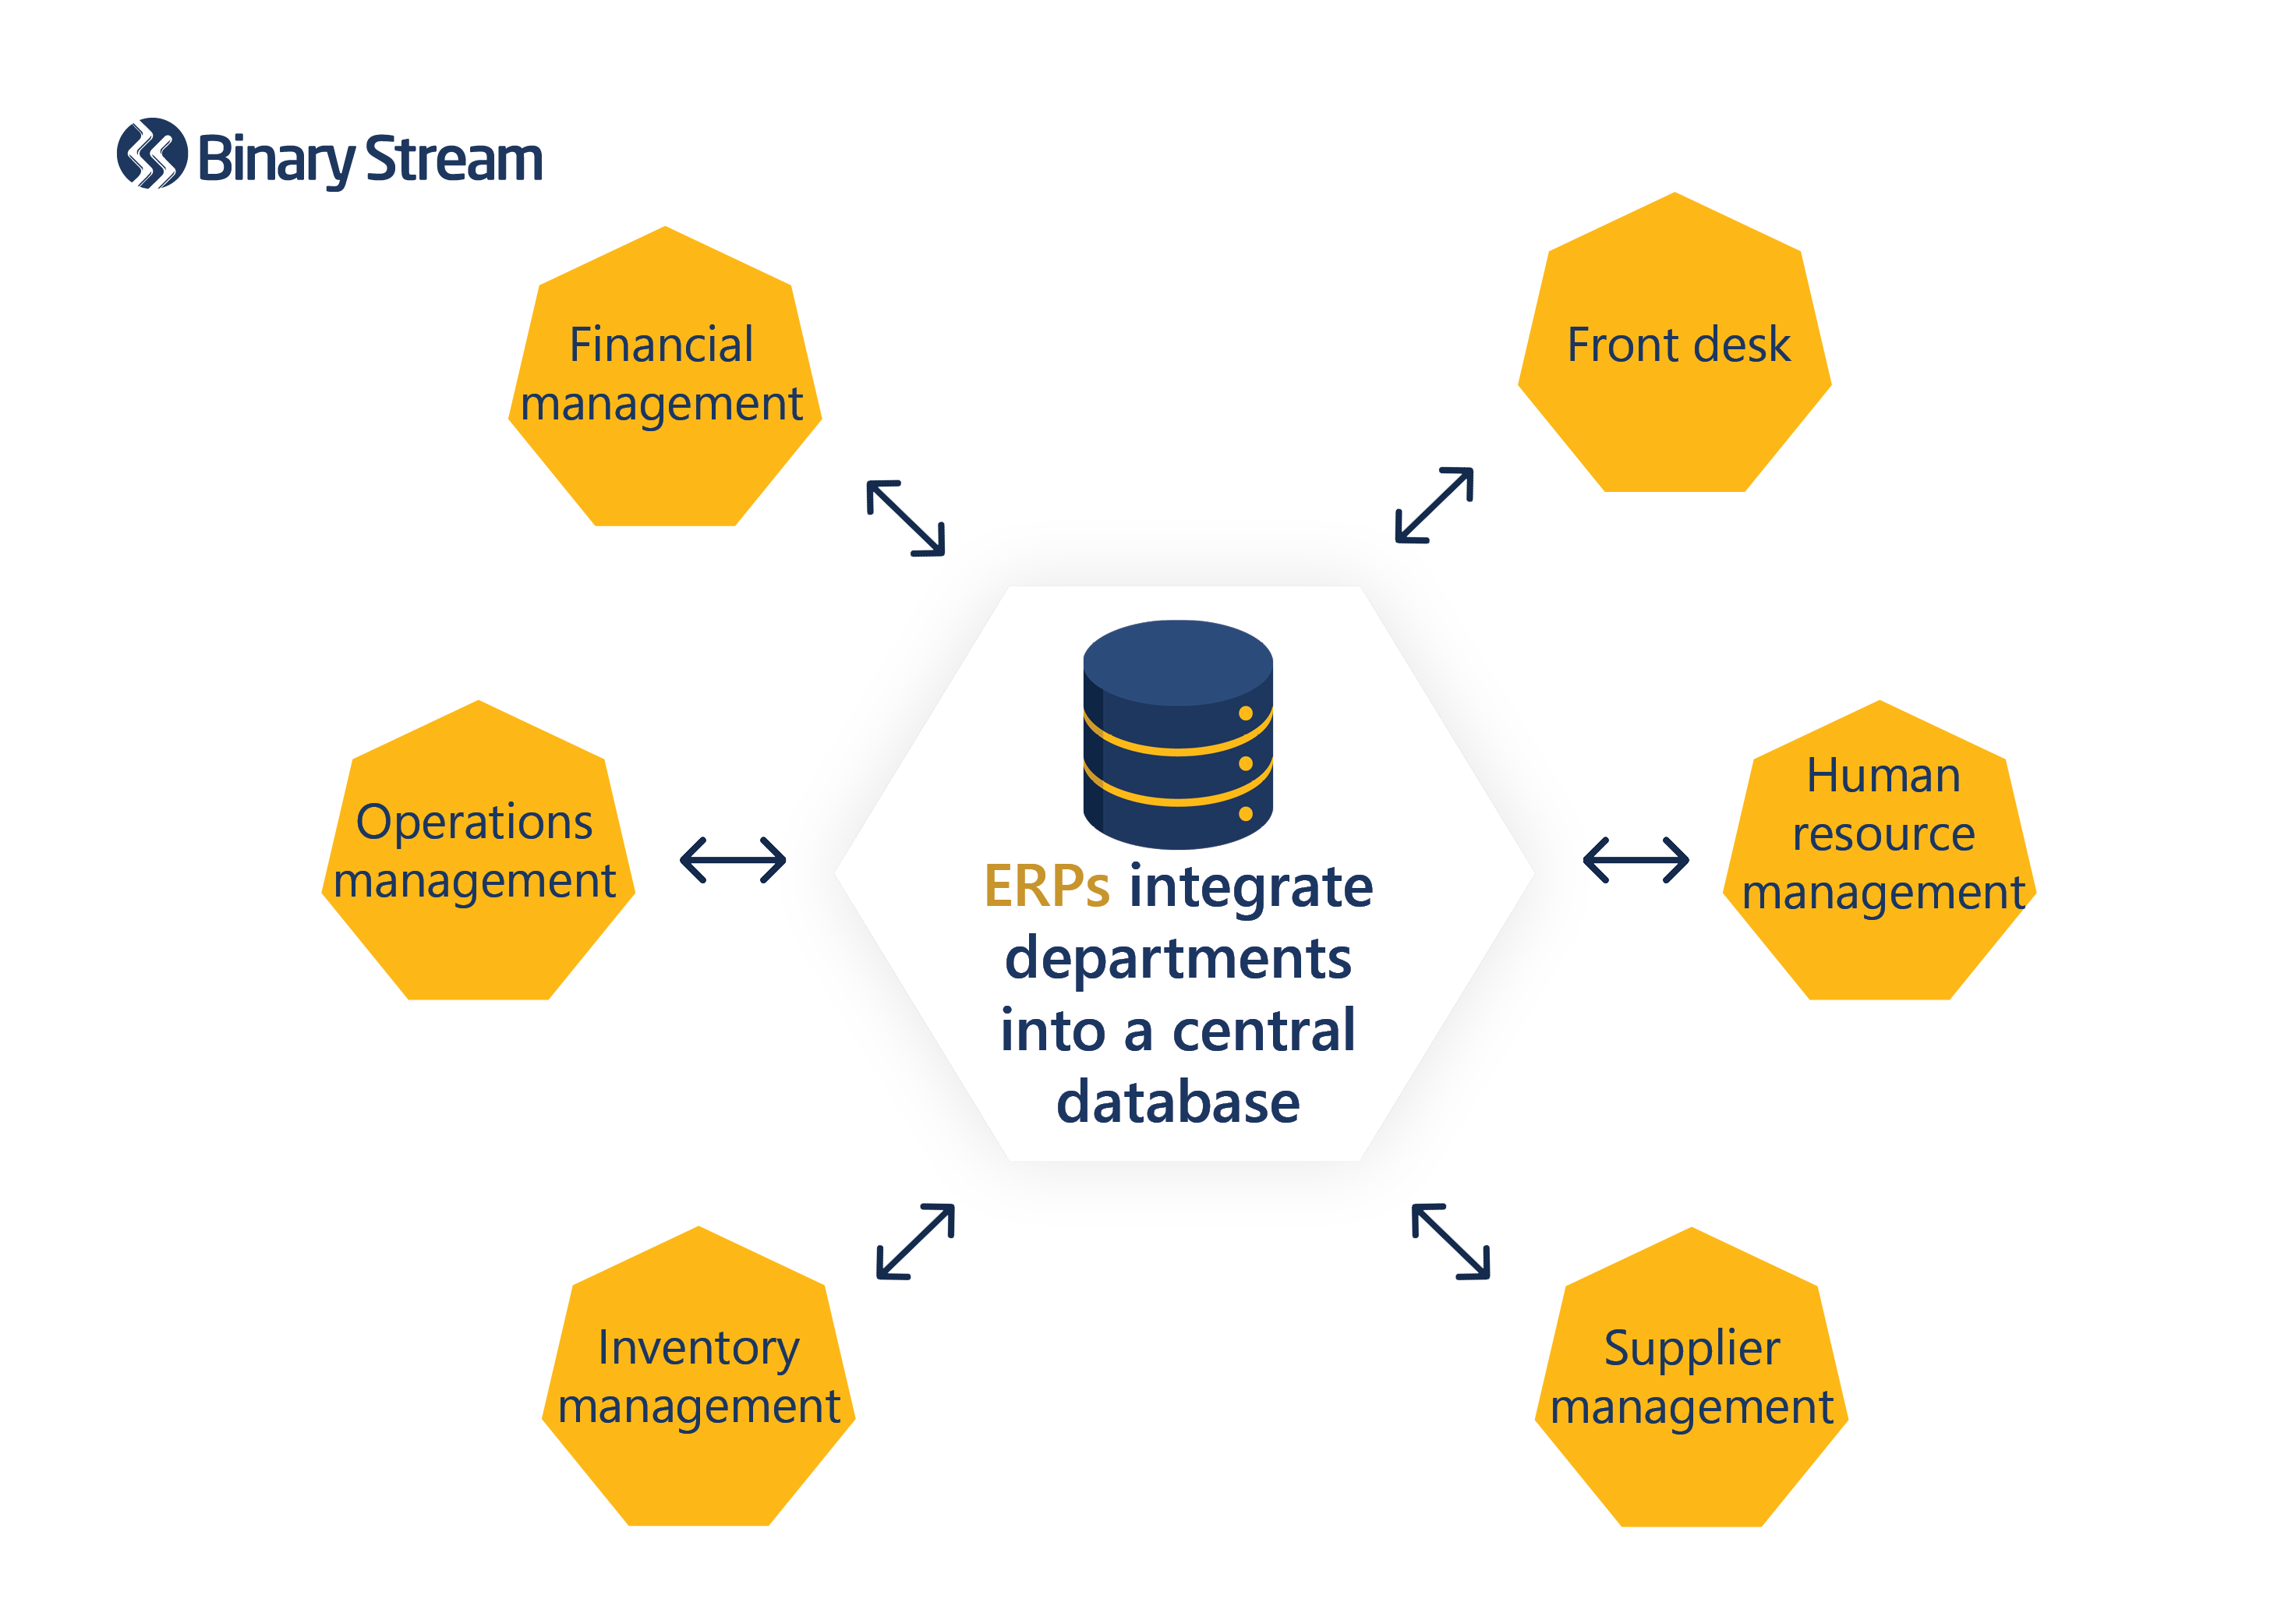 ERPs integrate into central database